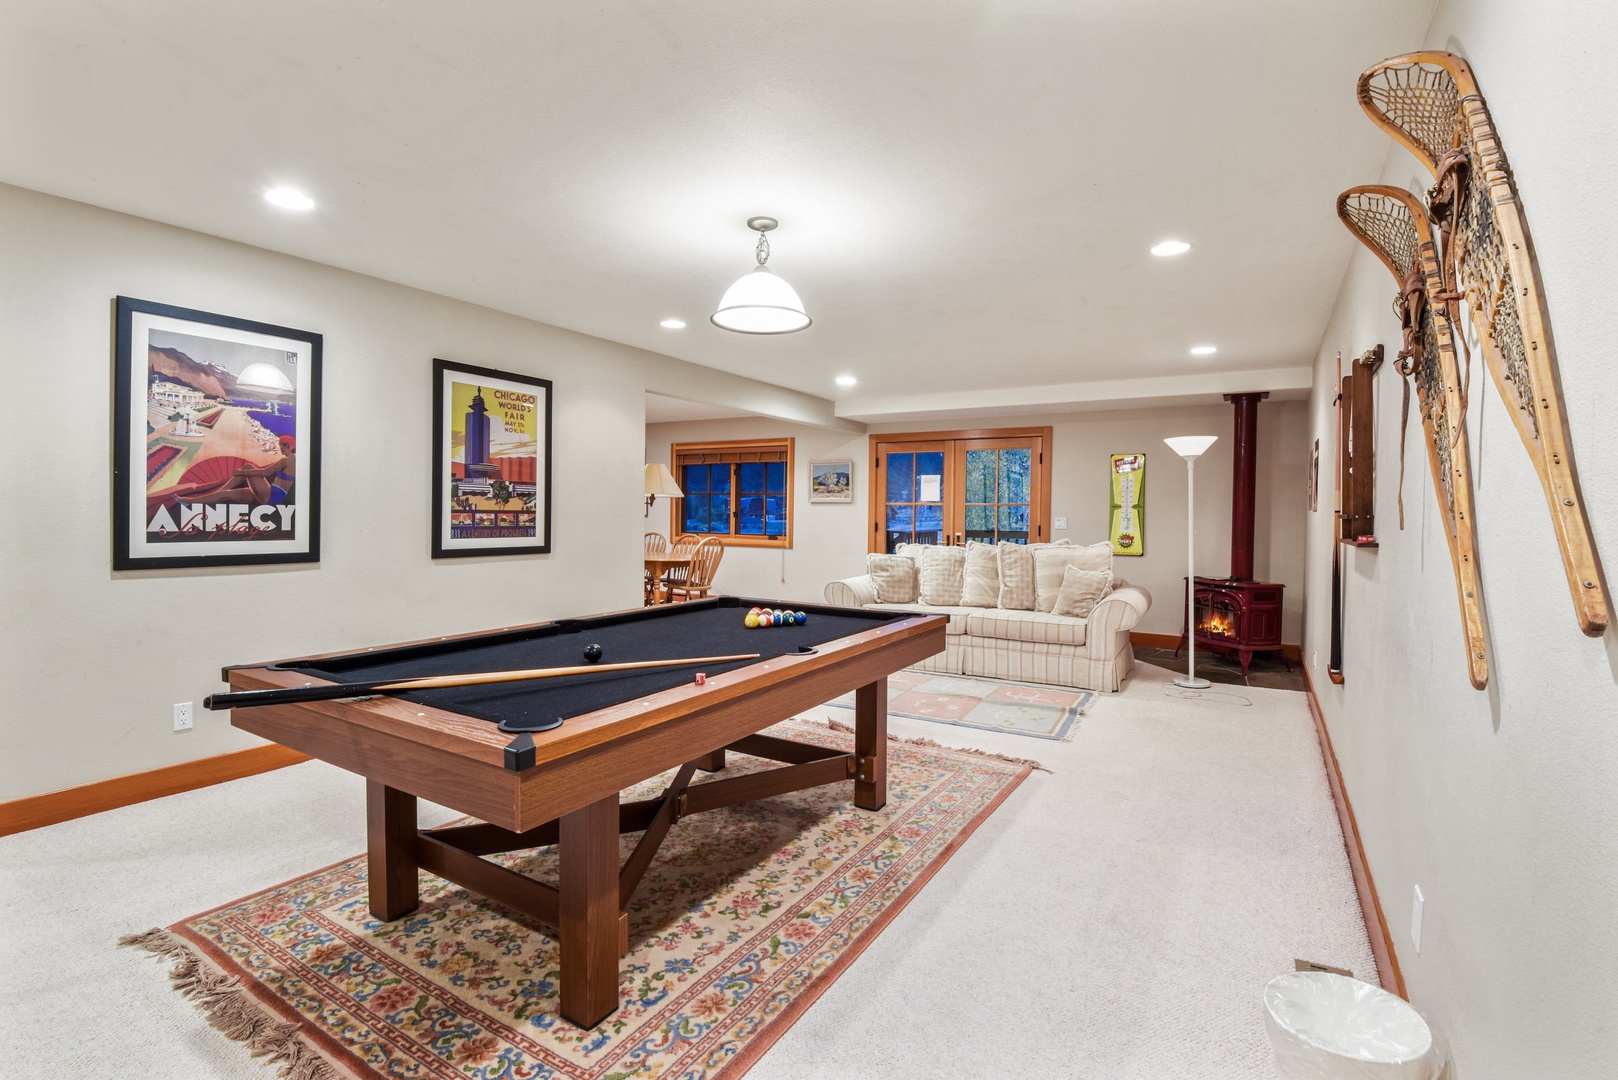 2nd floor den with pool table, dining table, and fireplace